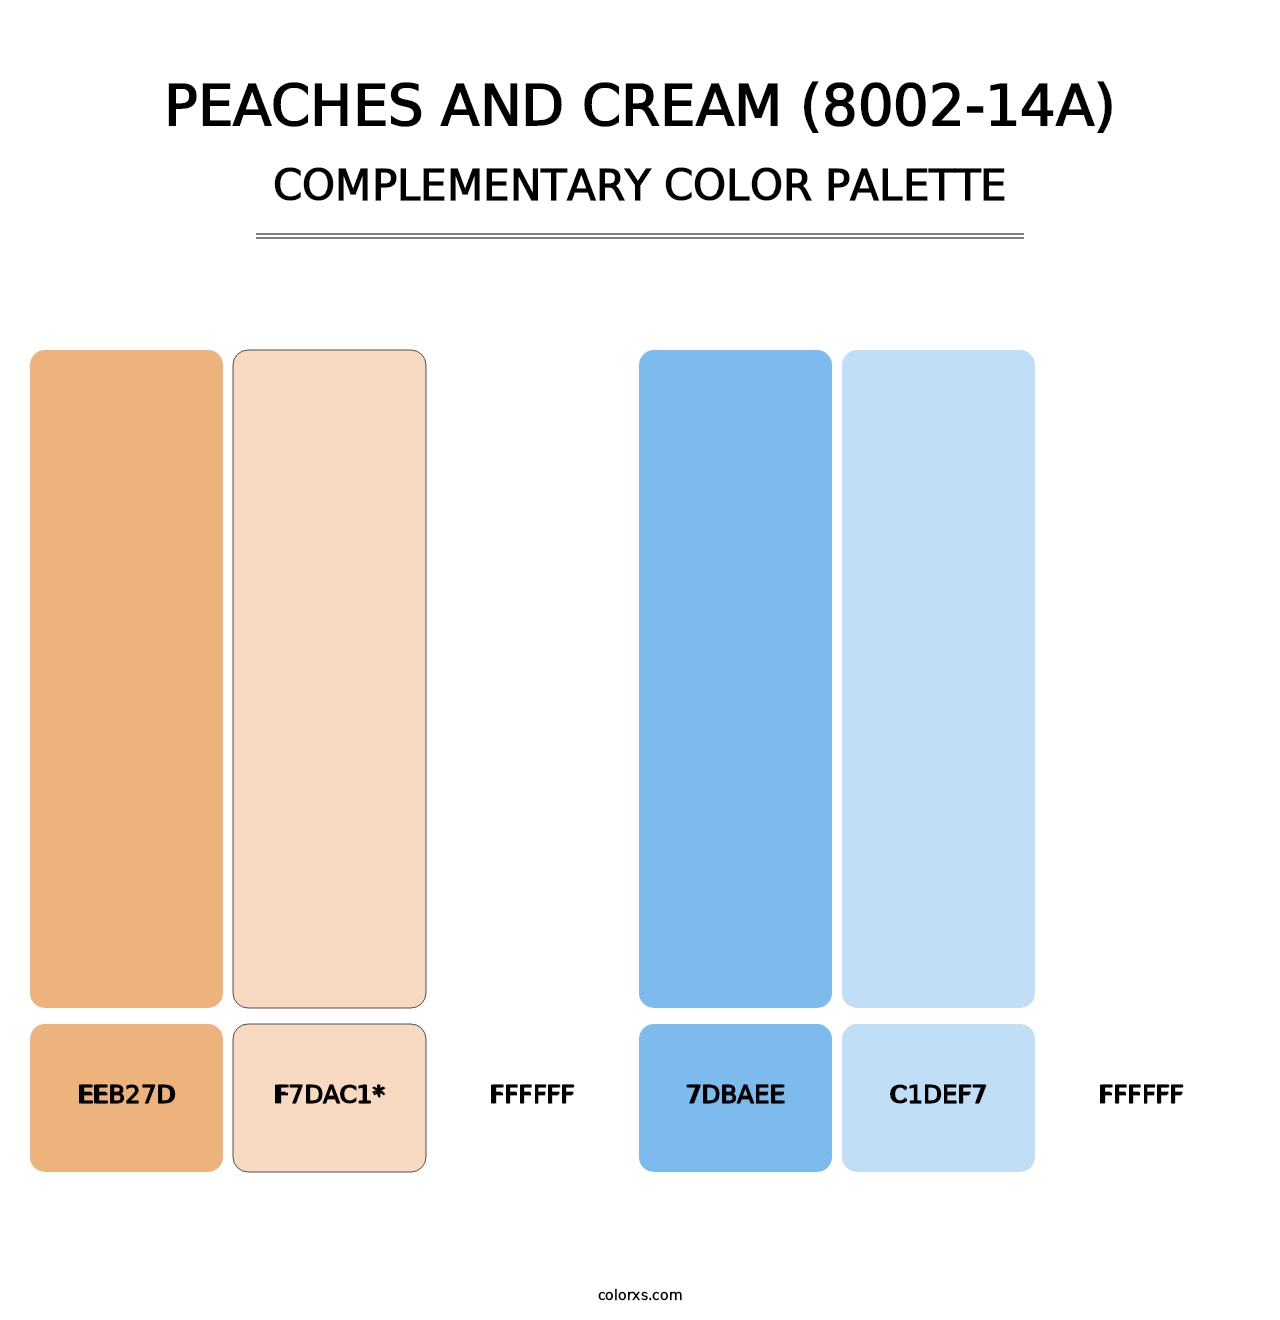 Peaches and Cream (8002-14A) - Complementary Color Palette